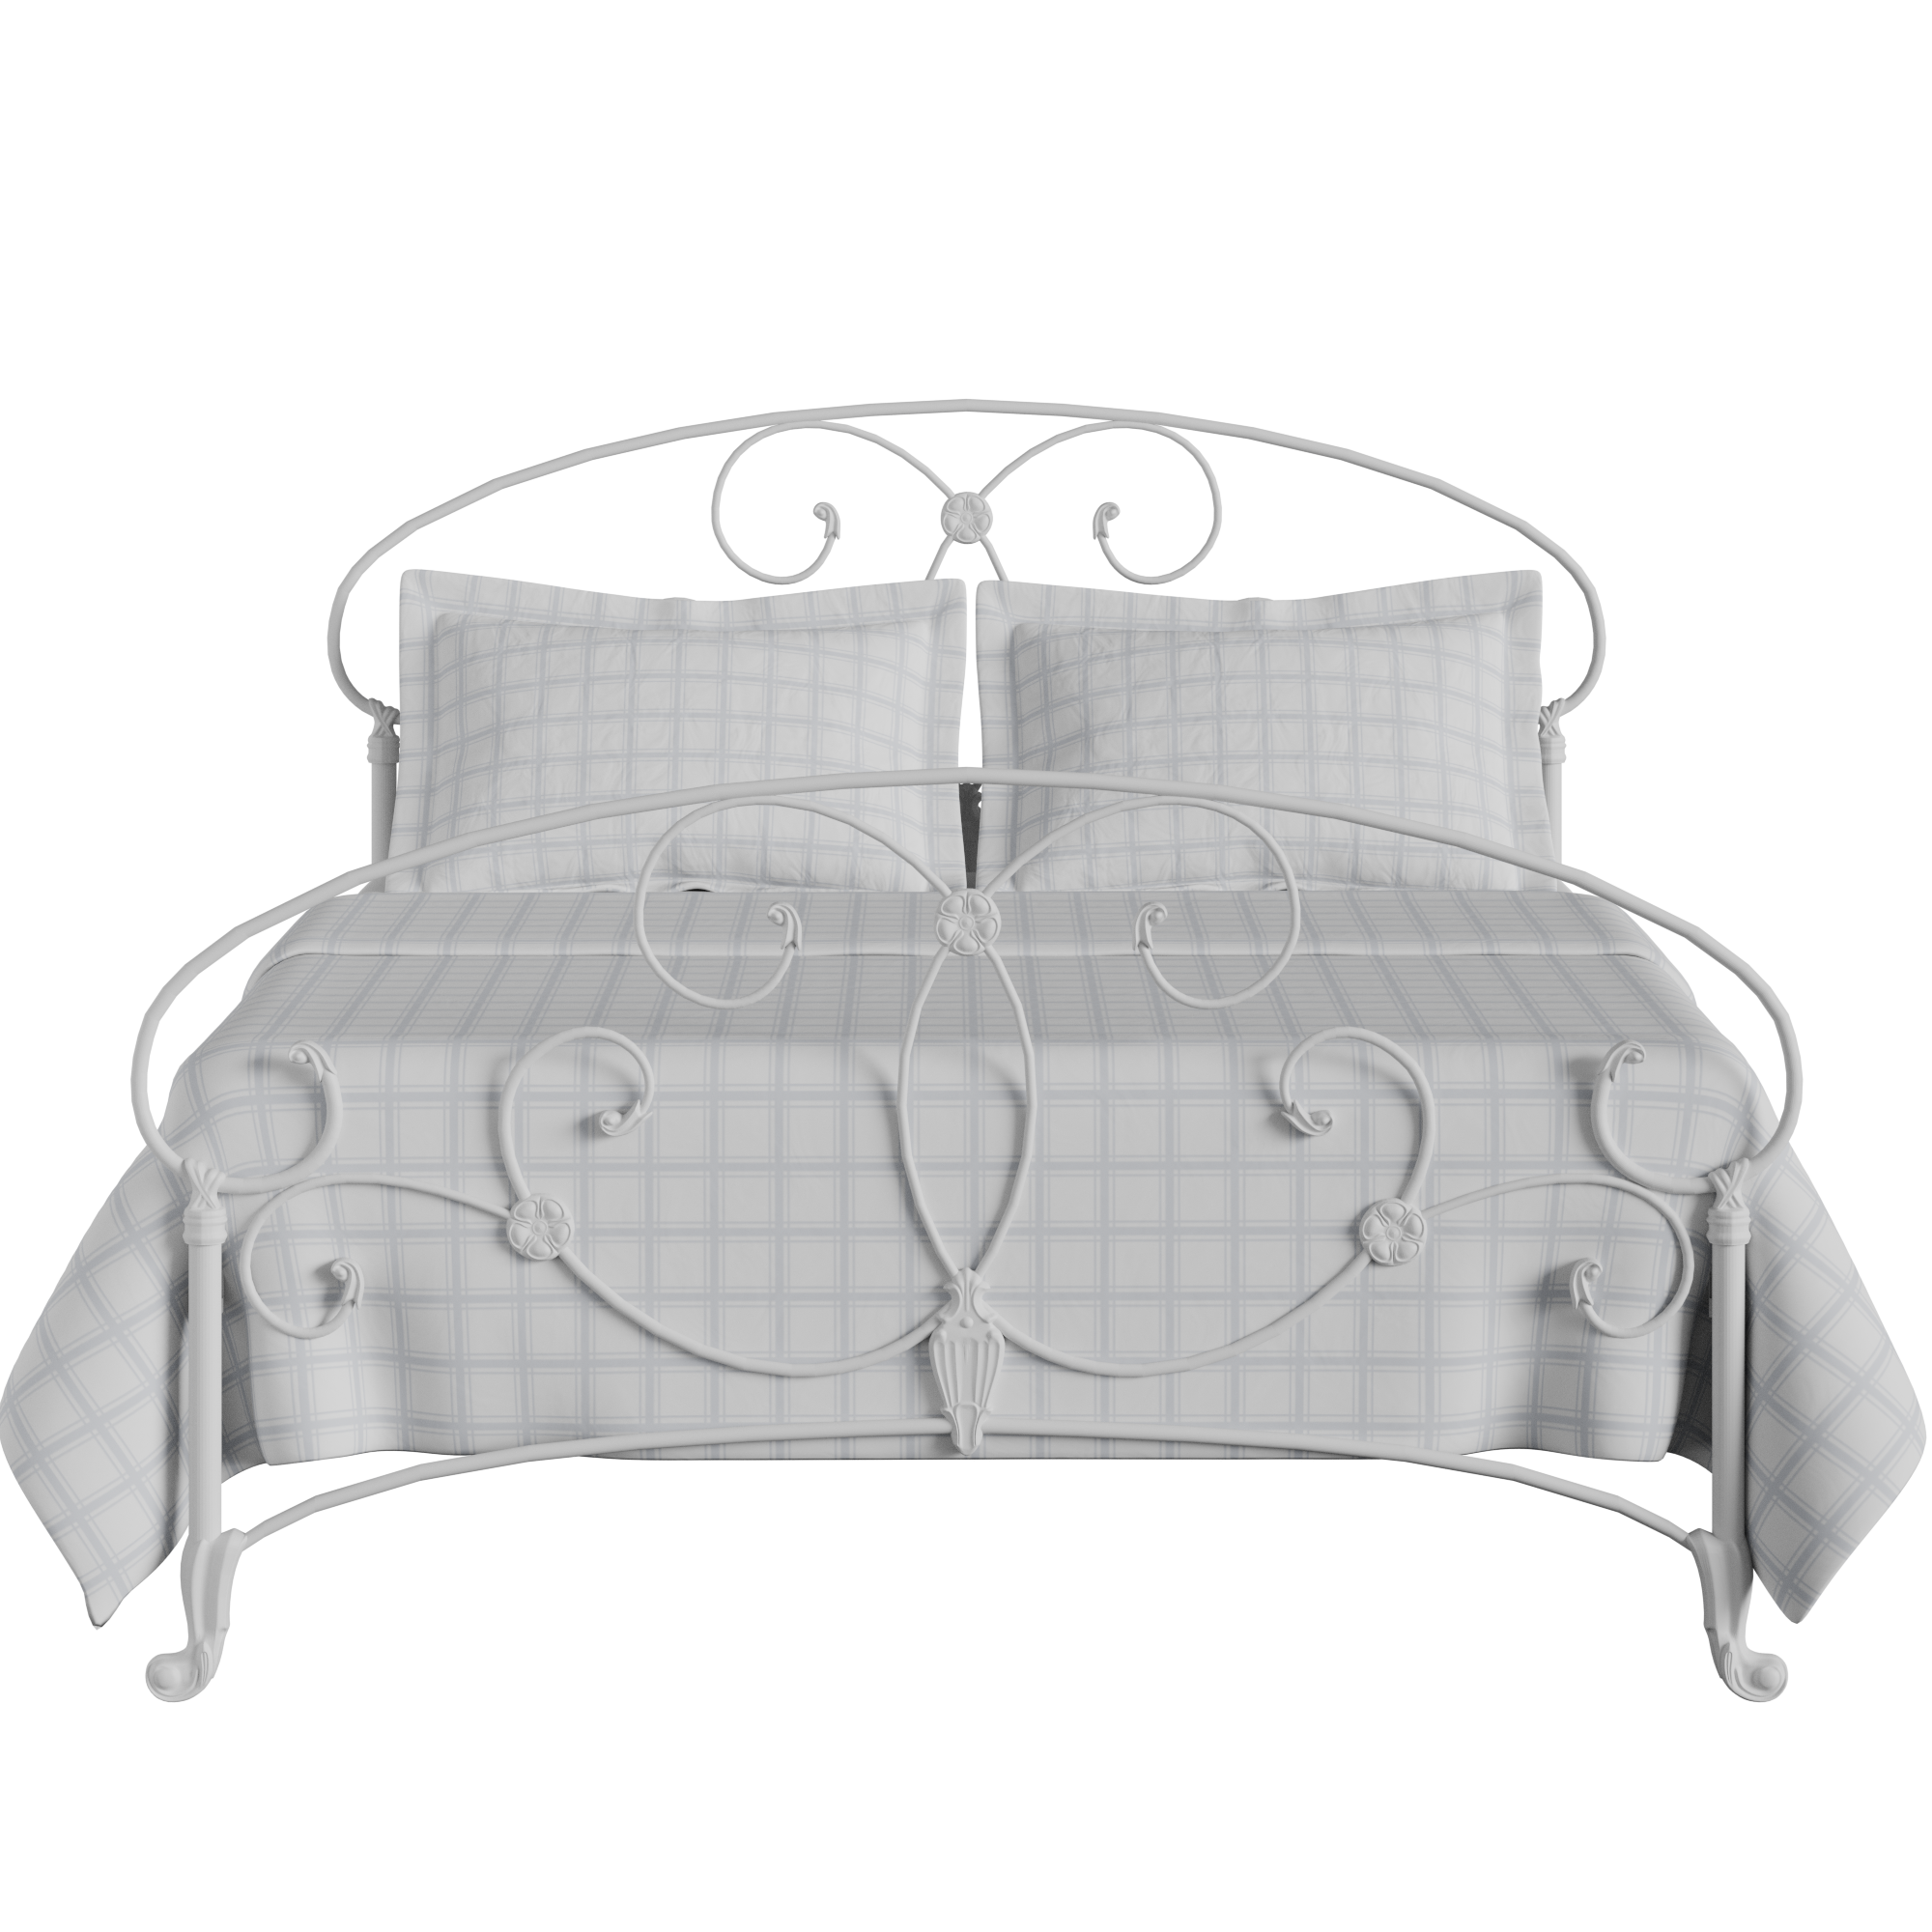 Arigna iron/metal bed in white